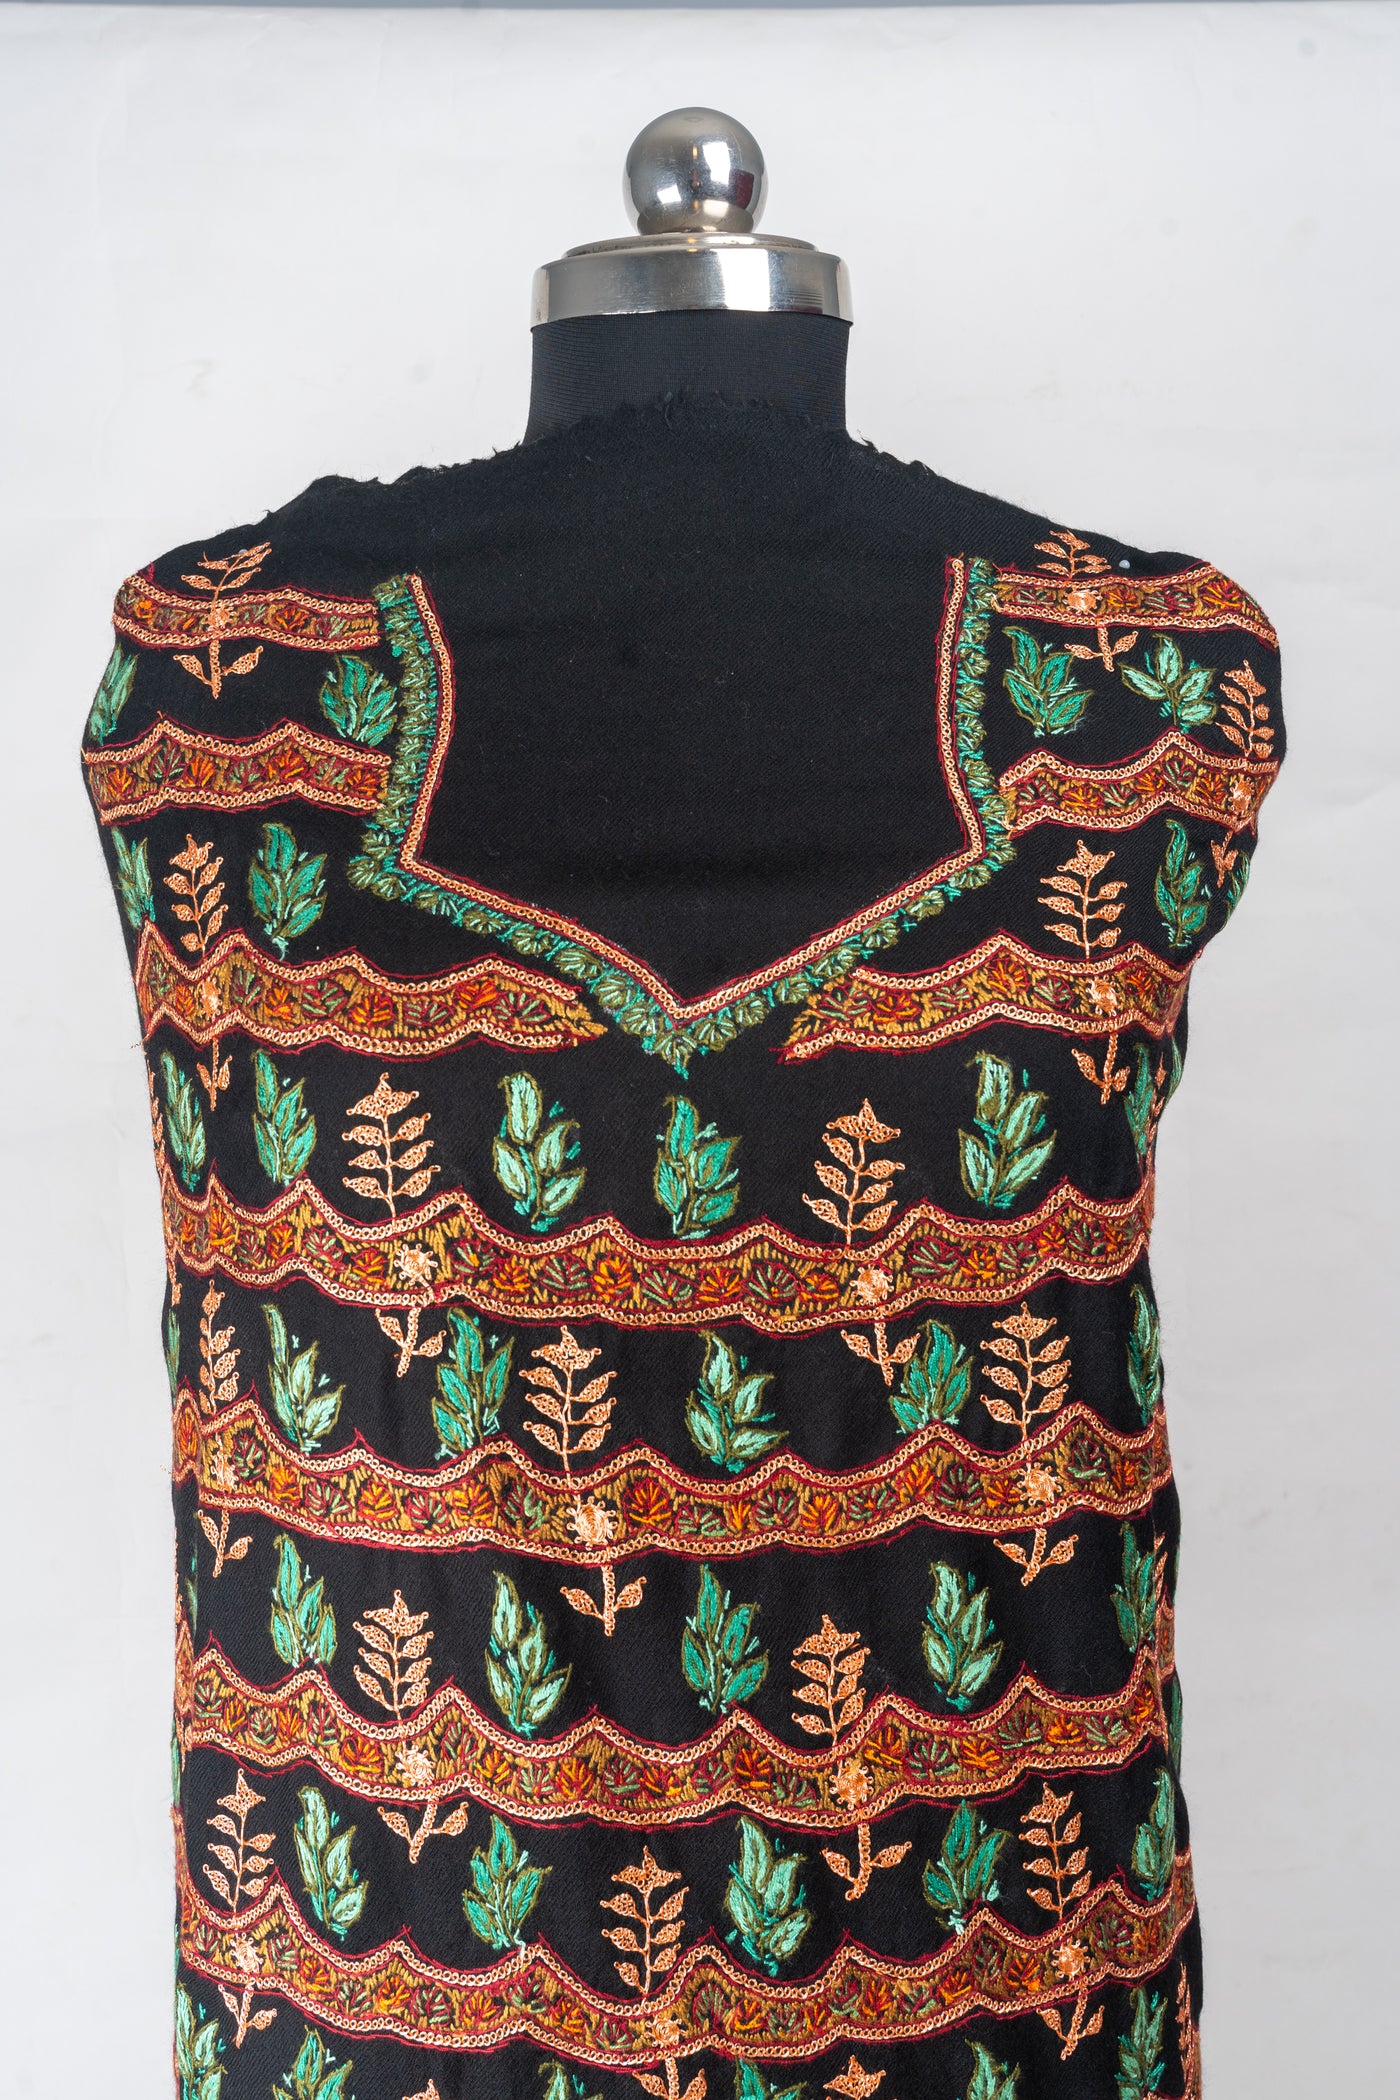 Shafak-e-Tilla: Kashmiri Hand Embroidered suit with combination of Sozni and Hand-Tilla Embroidery